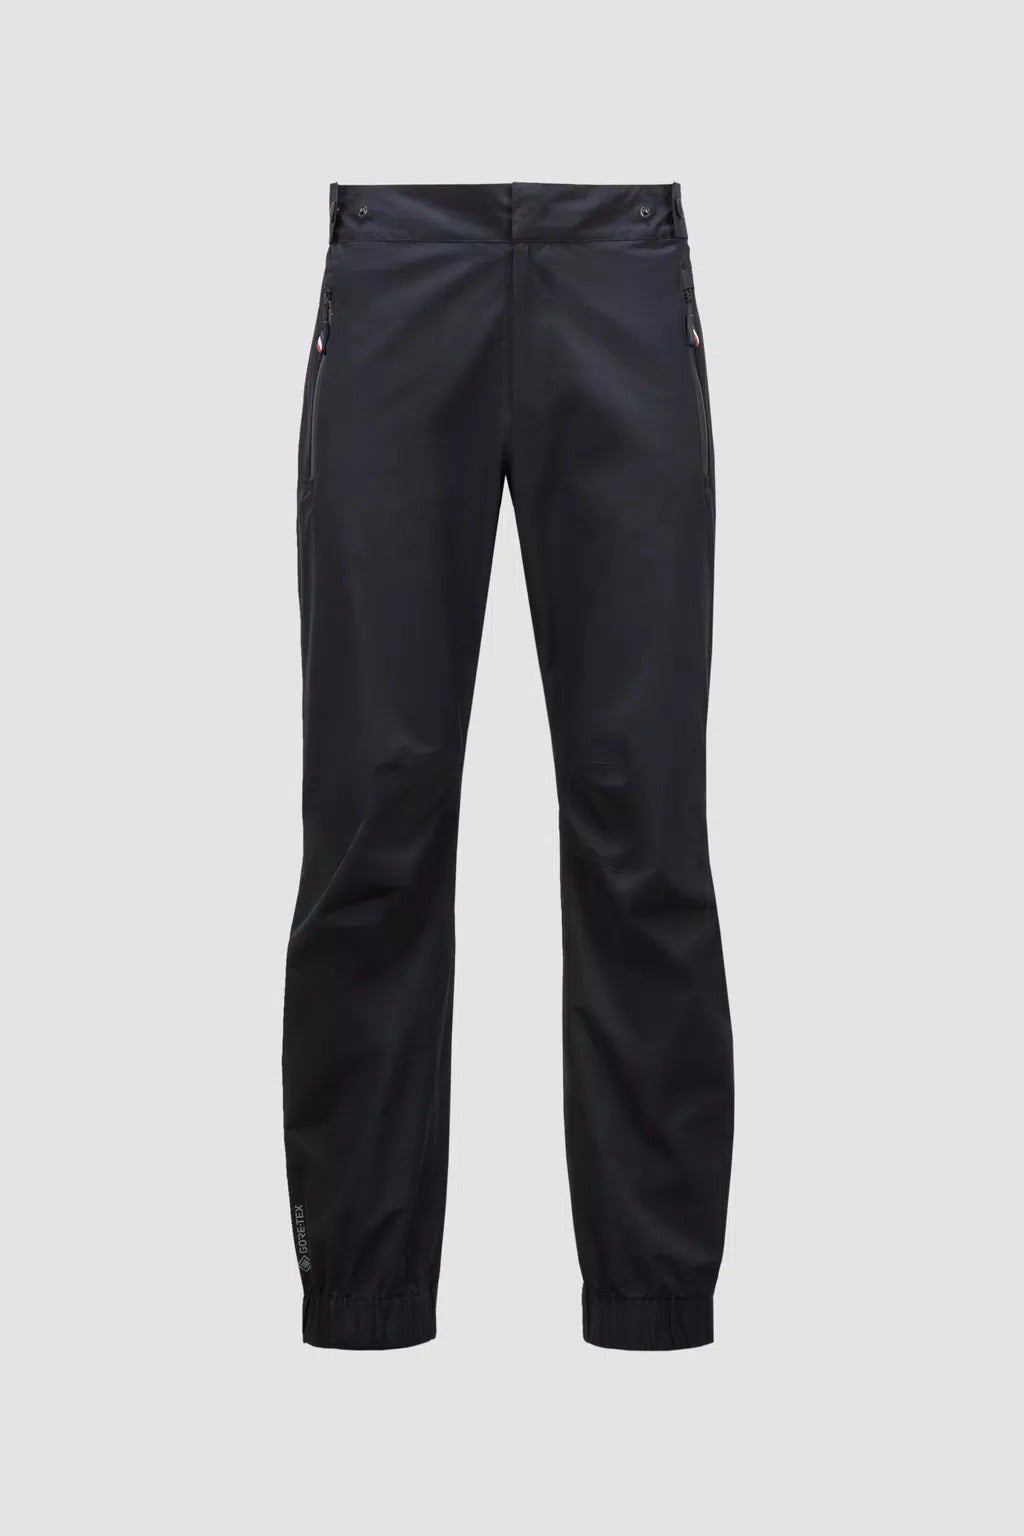 Goro-Tex pants<BR/>Collection Moncler Grenoble